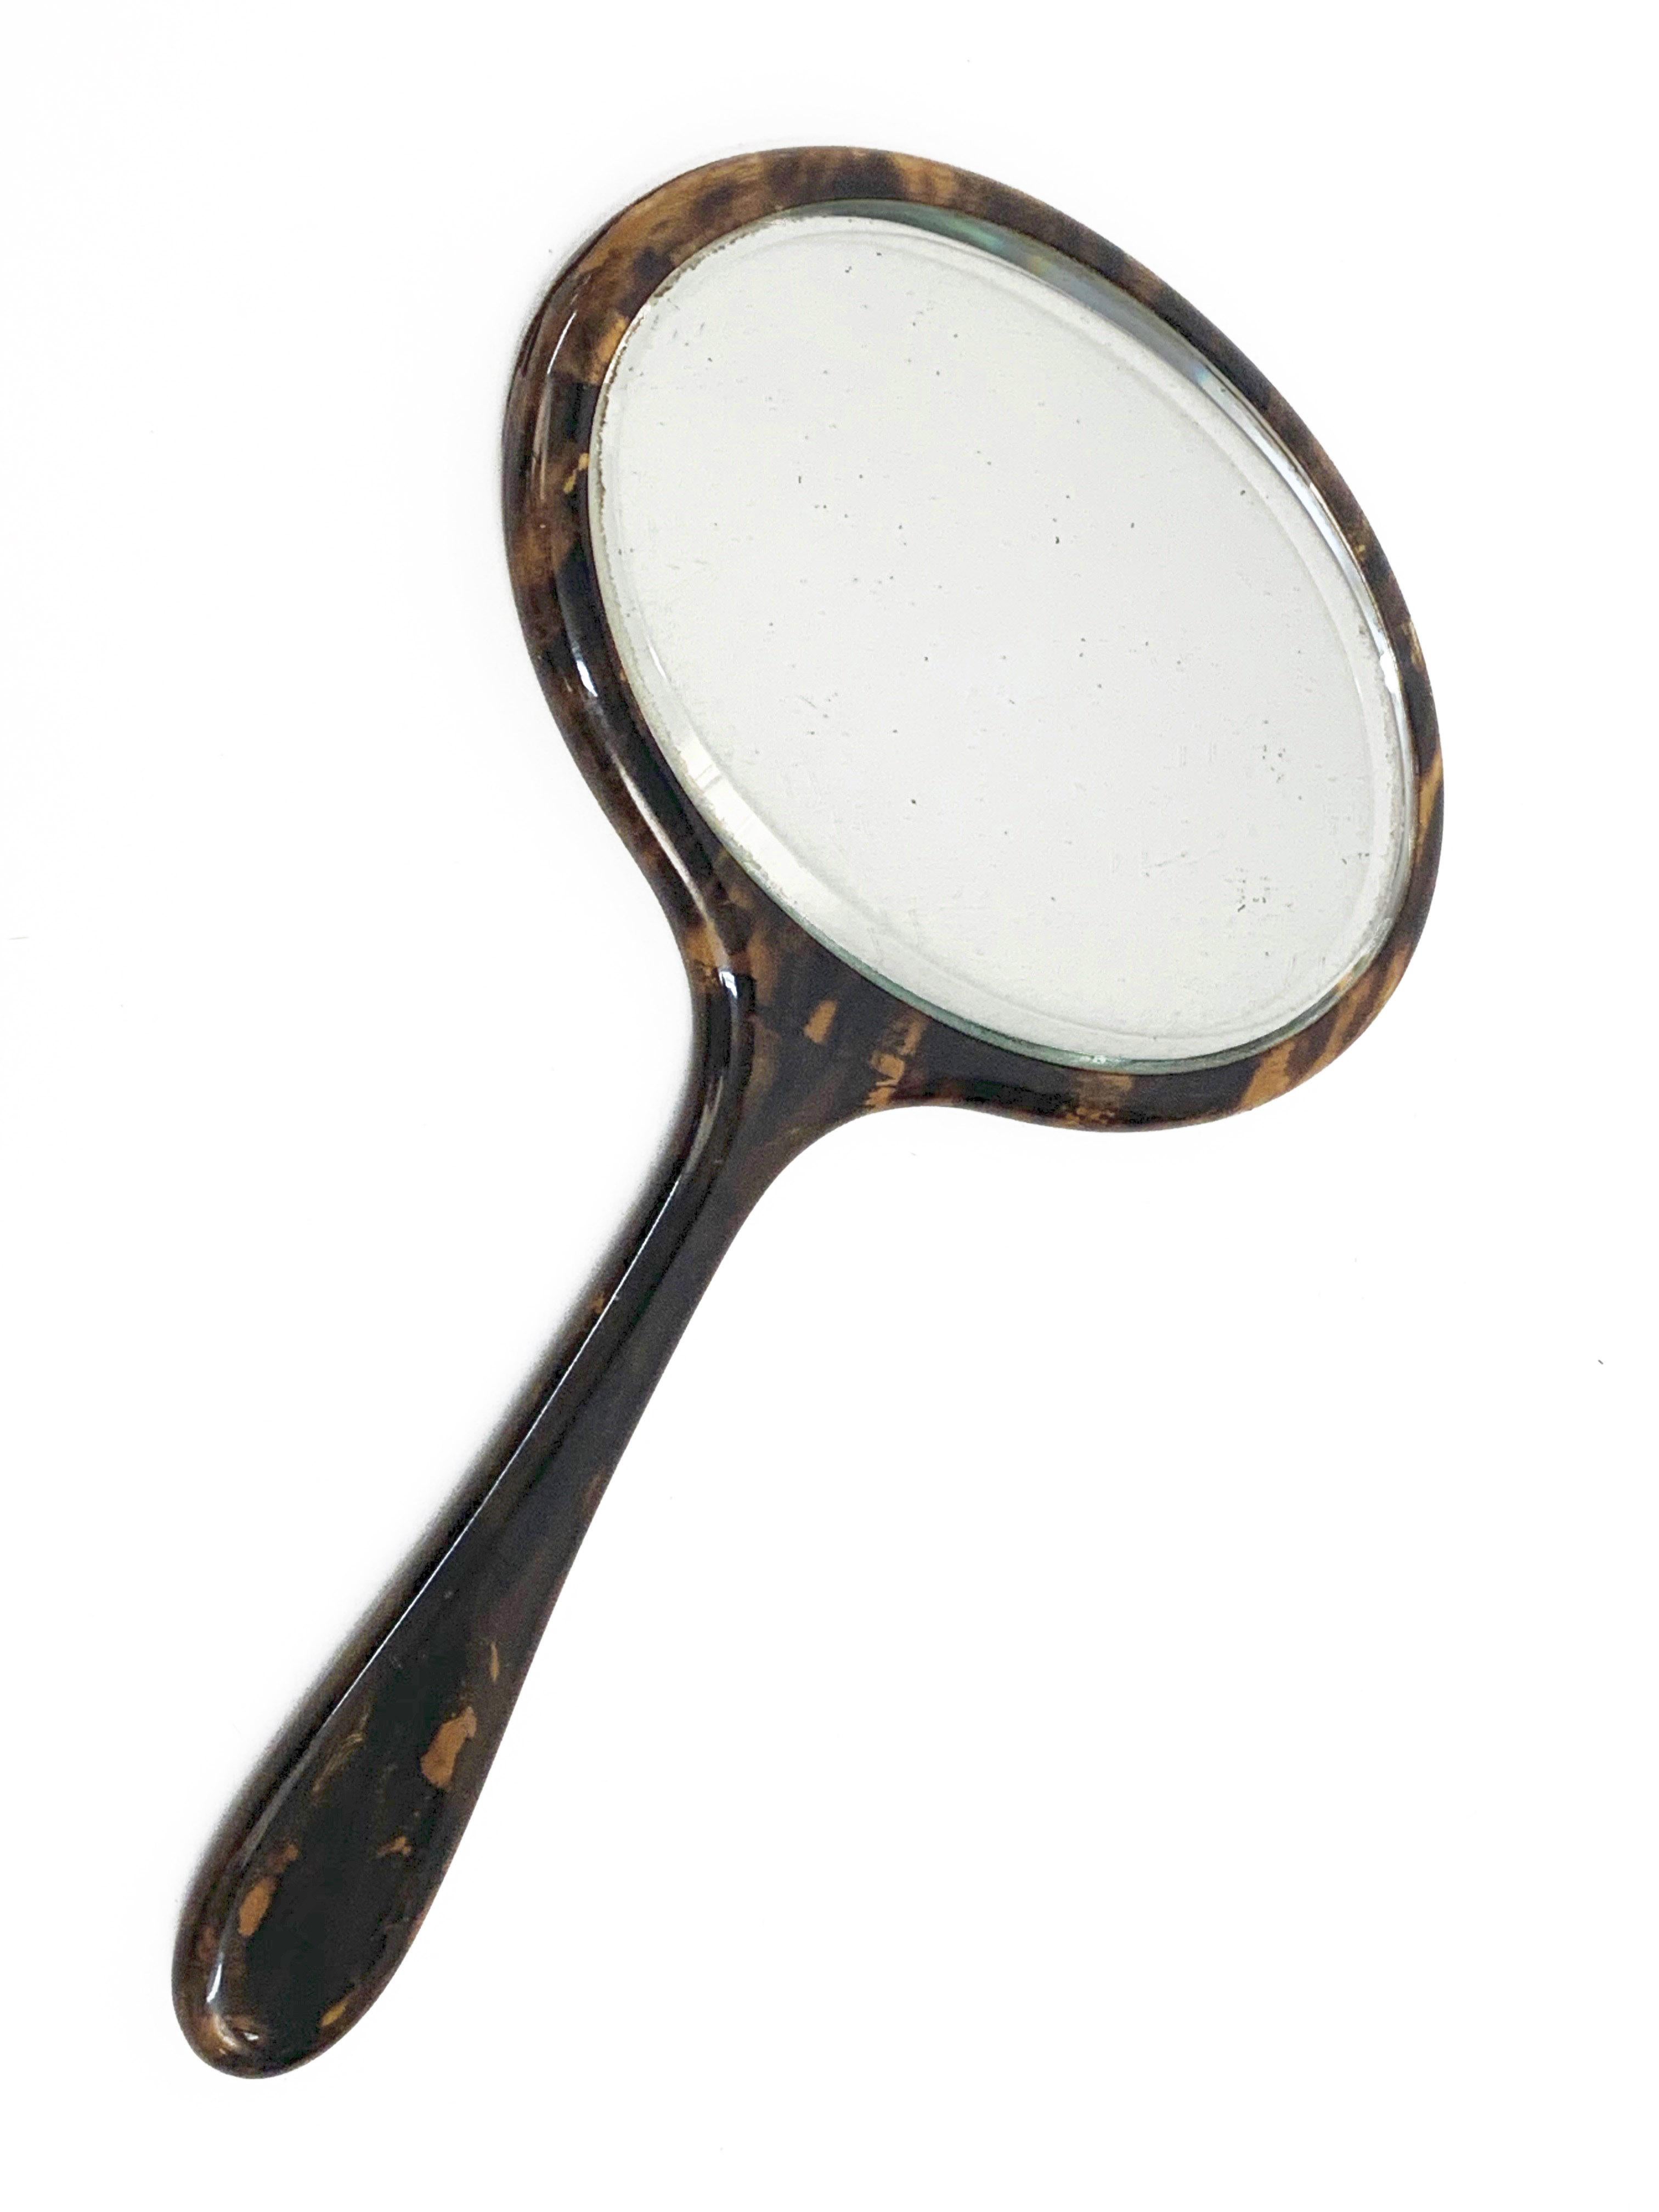 Chamfered Midcentury English Oval Faux Tortoiseshell Portable Mirror, 1950s For Sale